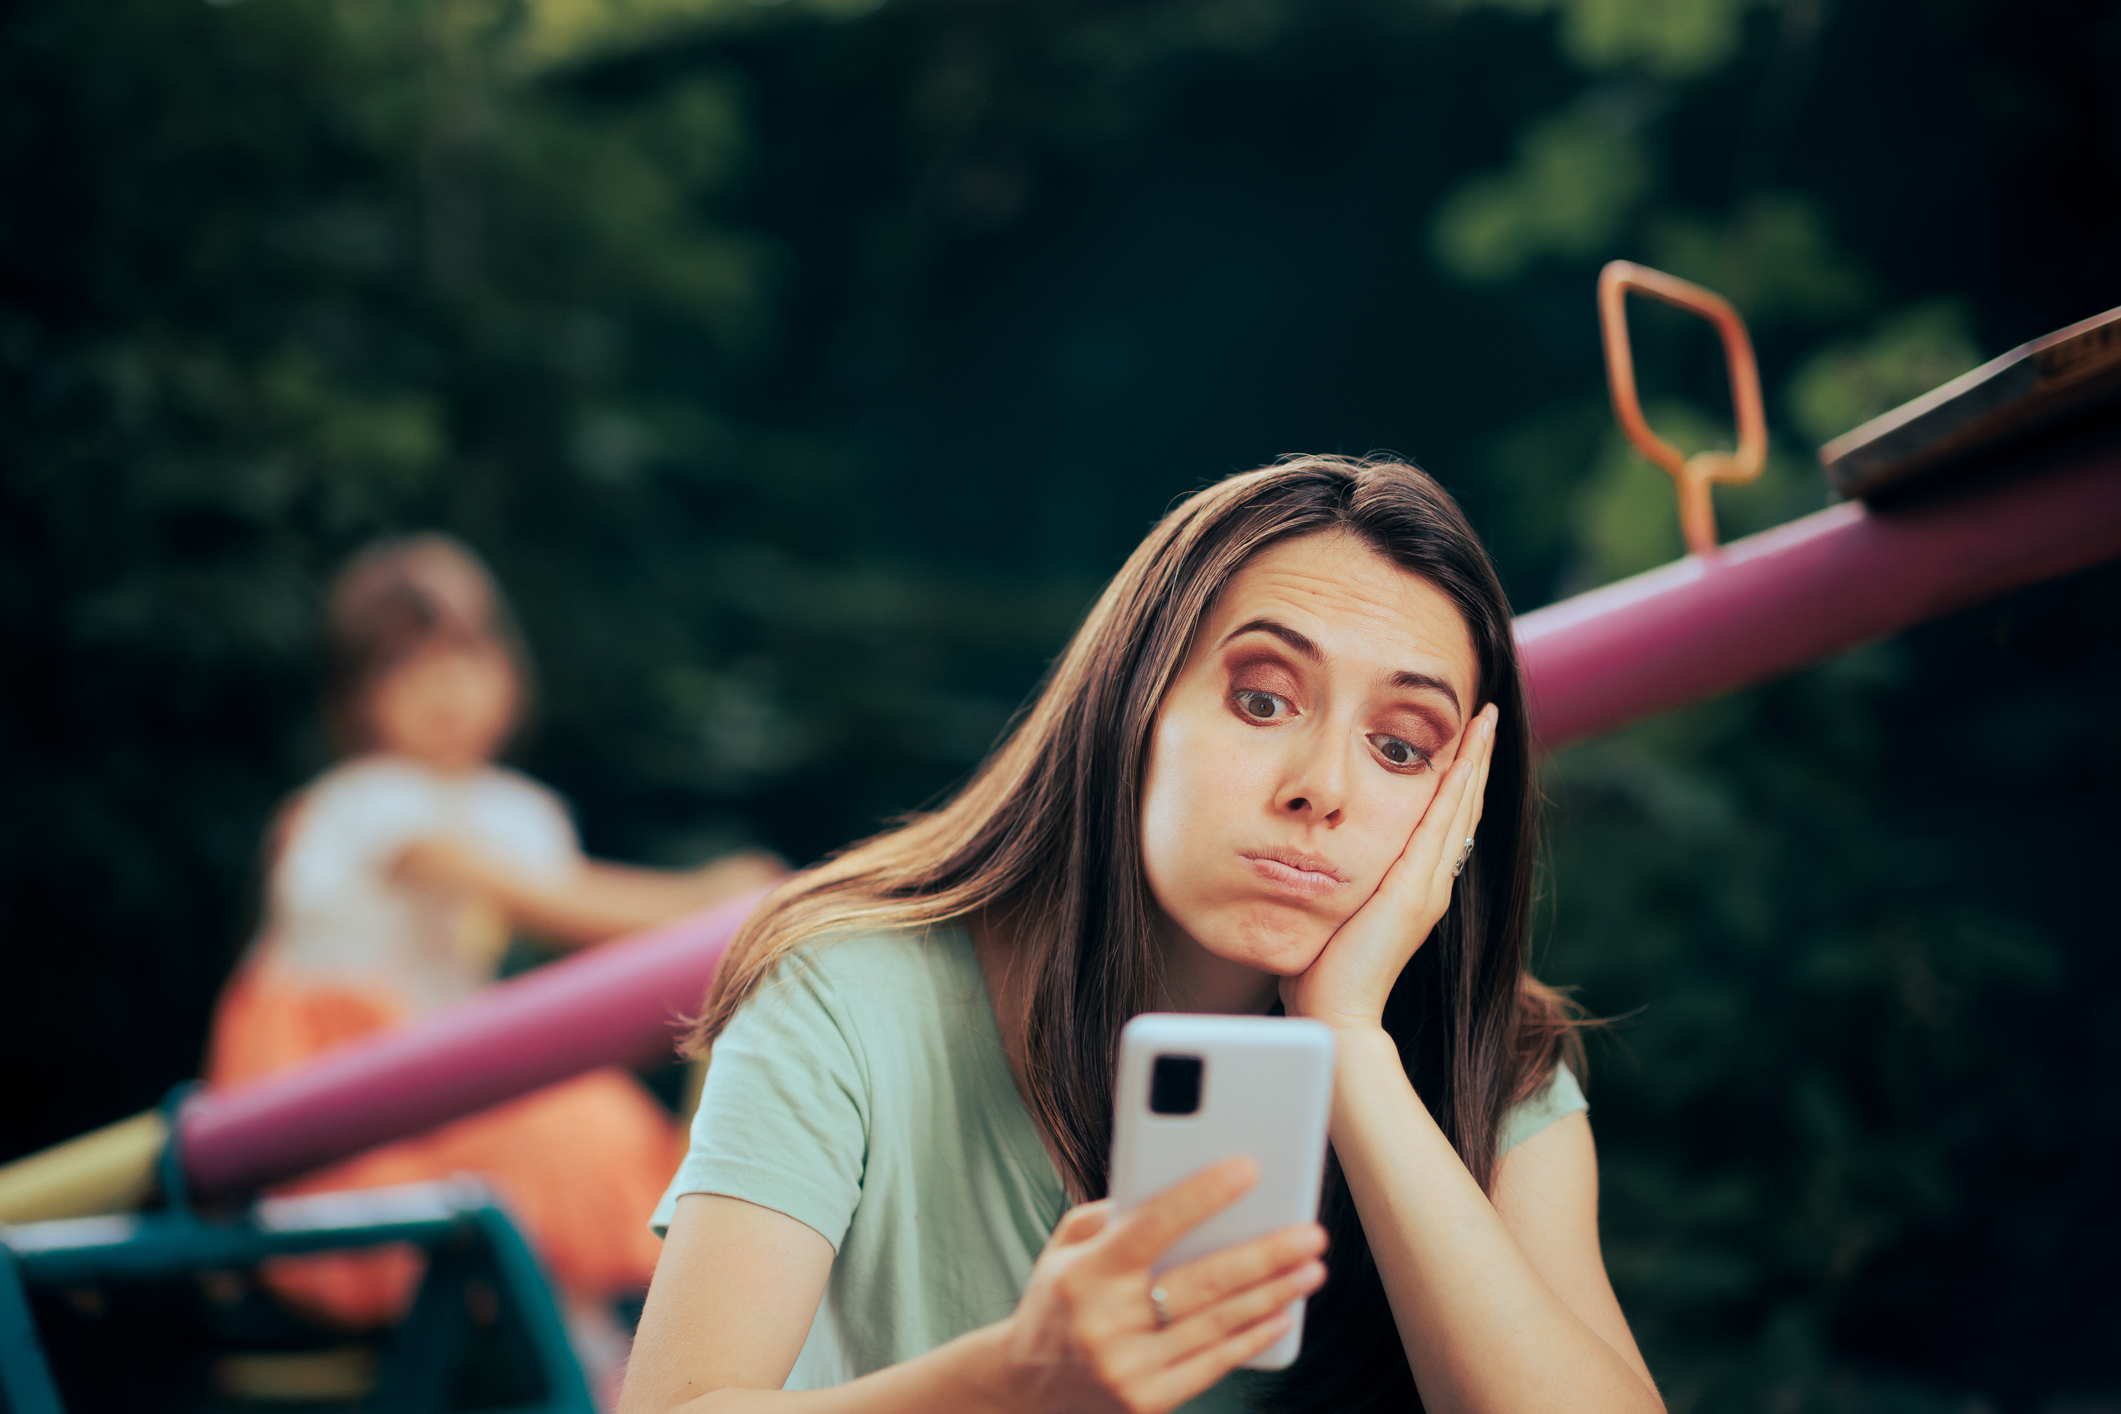 Woman looking at phone with bored expression, child in background on swing. They are outdoors, likely at a park